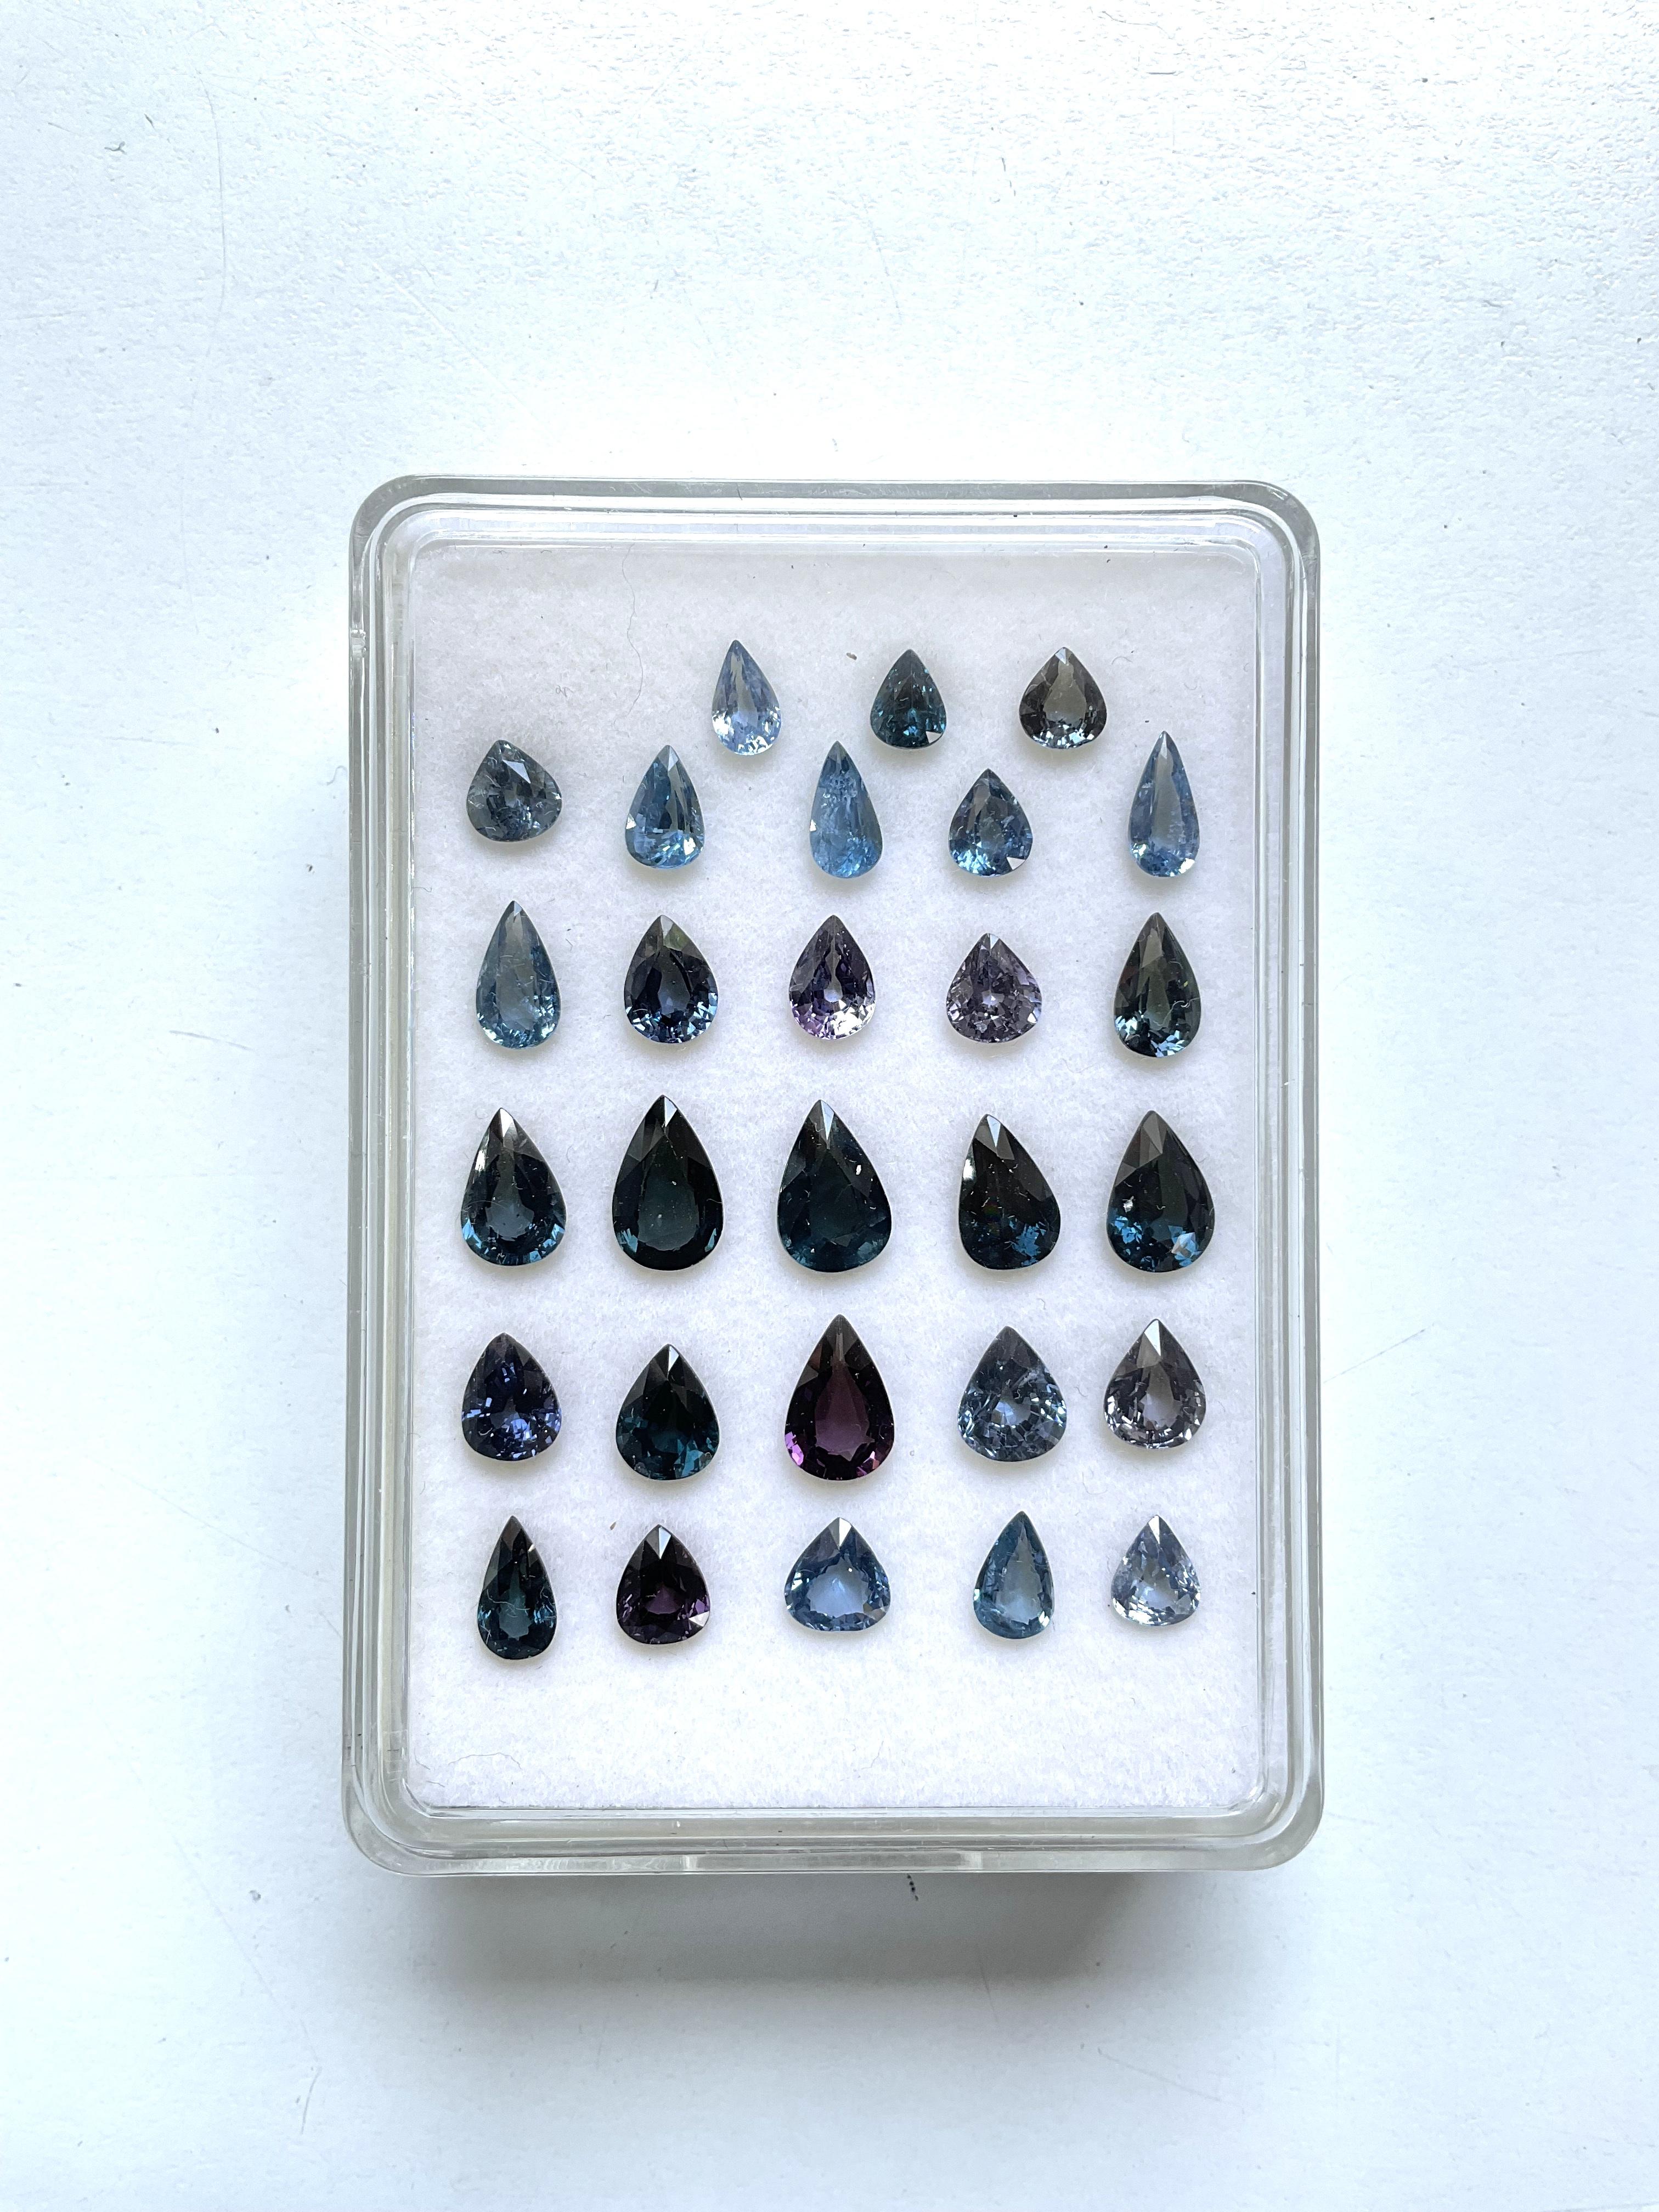 35.12 Carat Blue Spinel Tanzania Faceted Pear Cut stone For Jewelry Natural Gem For Sale 3